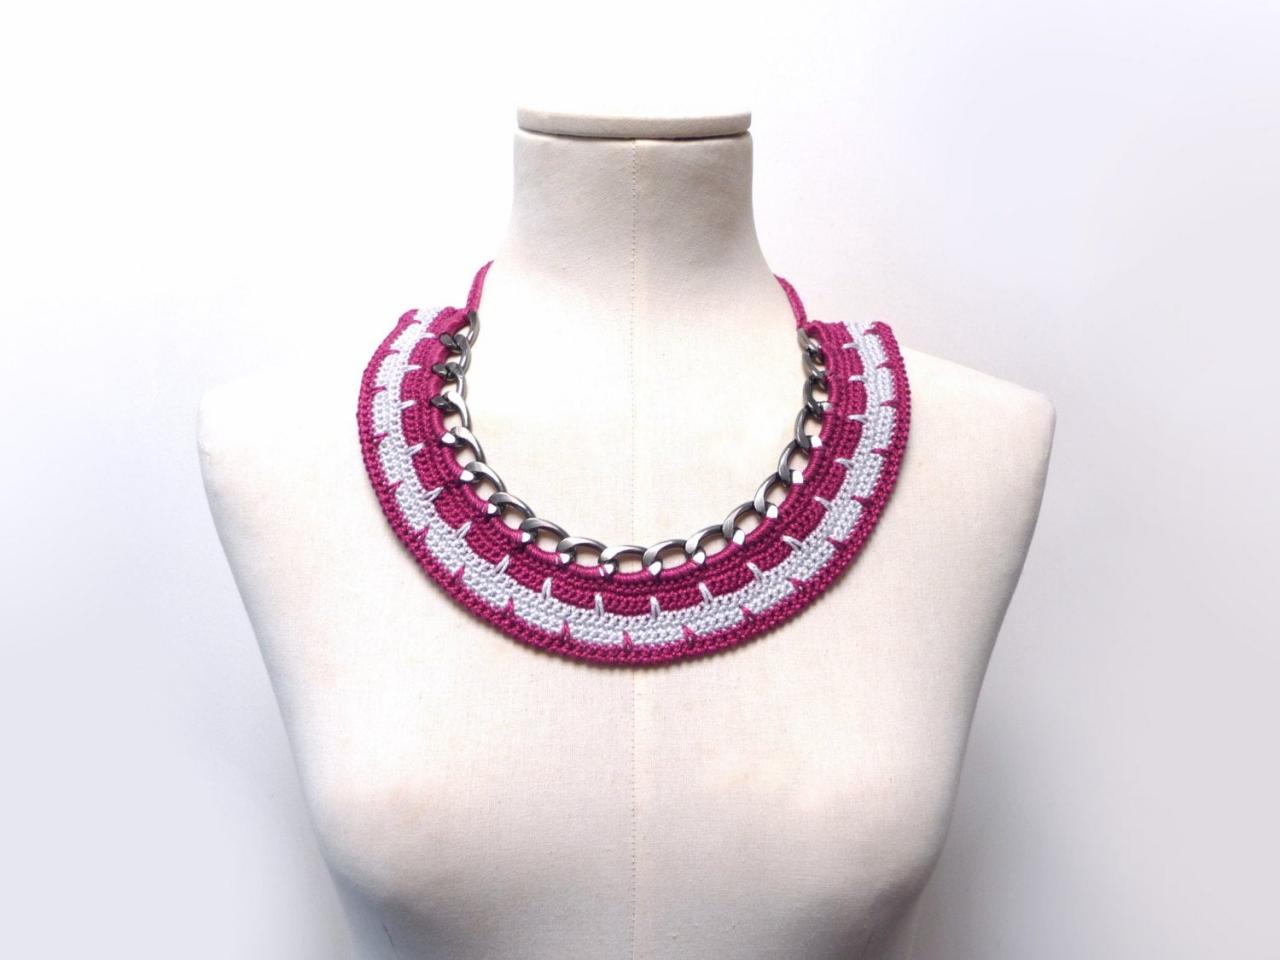 Crochet Cotton And Chain Necklace Choker - Color Block Statement Necklace - Gunmetal Chain With Plum Purple / Burgundy And Grey Cotton